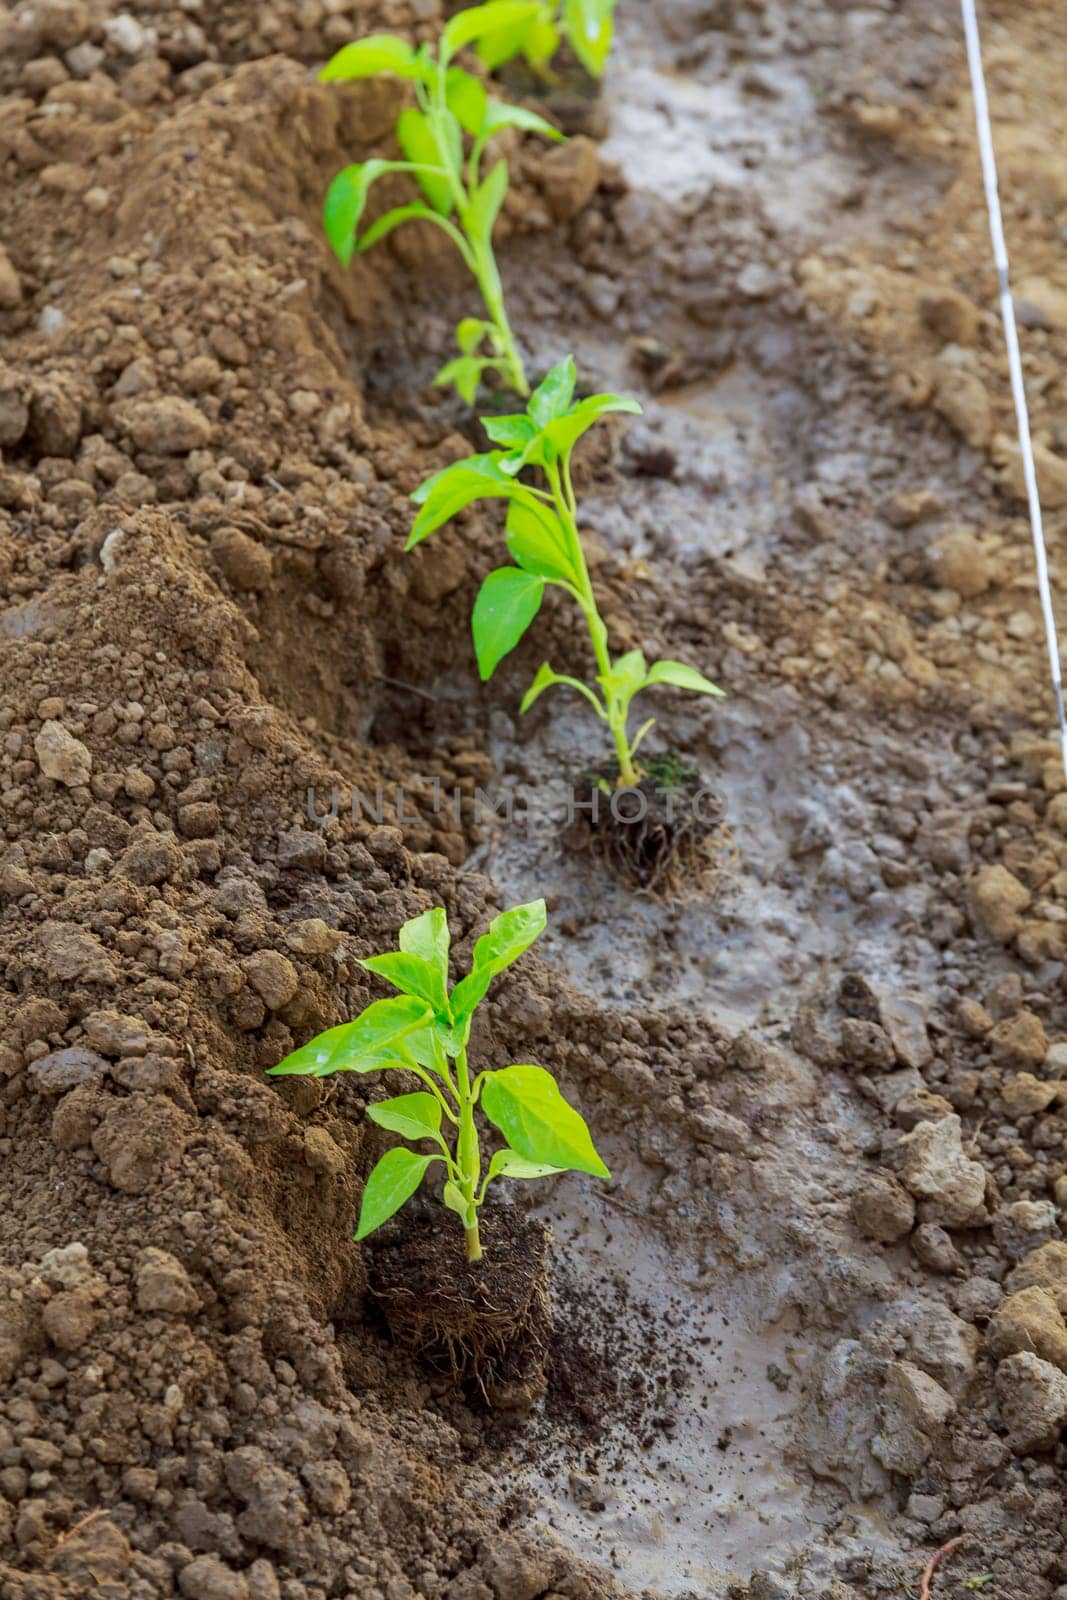 Depth at which you plant pepper seedlings is essential for their proper development. by Yaroslav